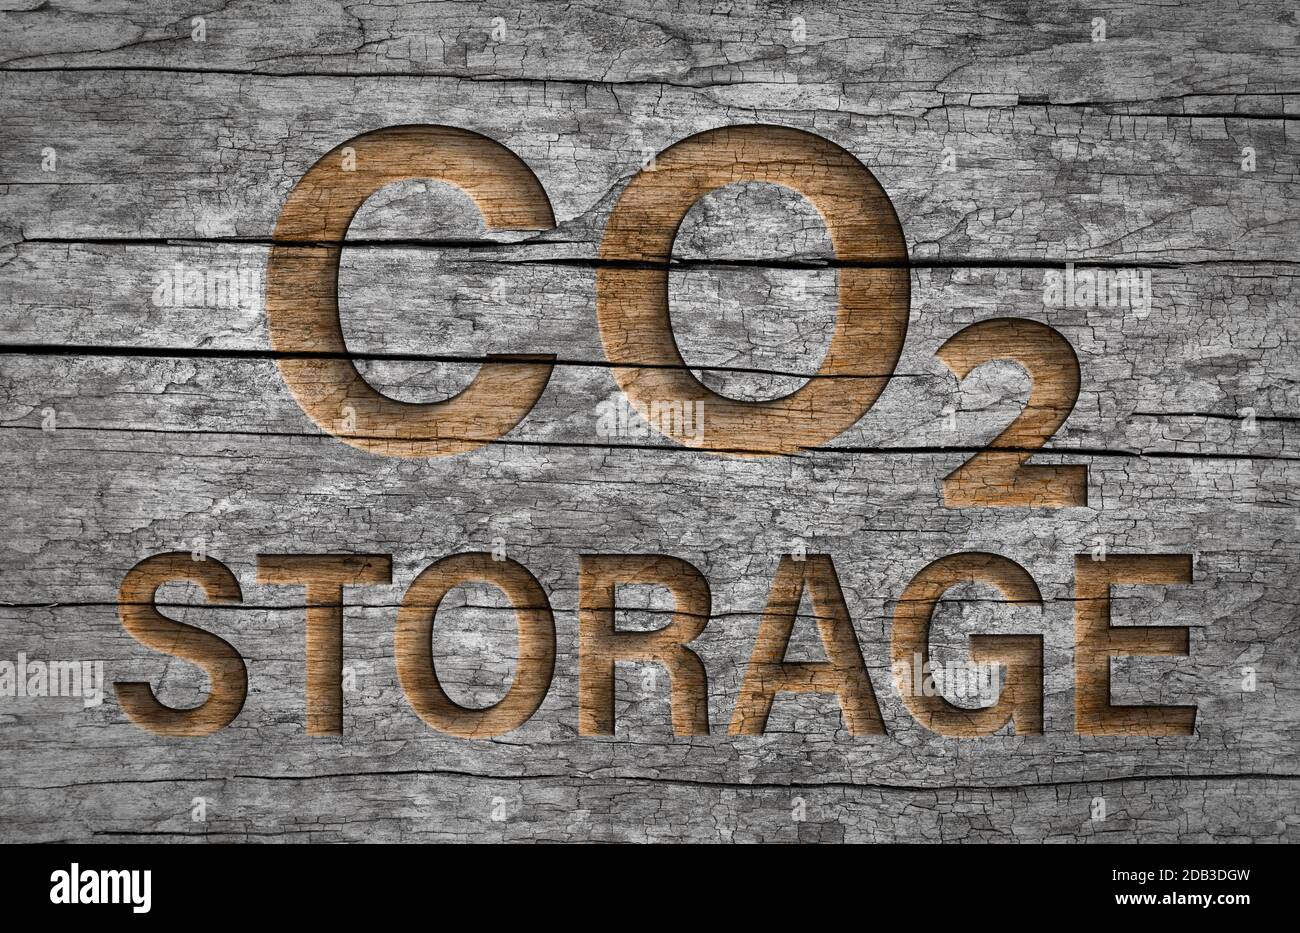 Co2 text written in wood for natural storage of carbon dioxide emission or compensation Stock Photo